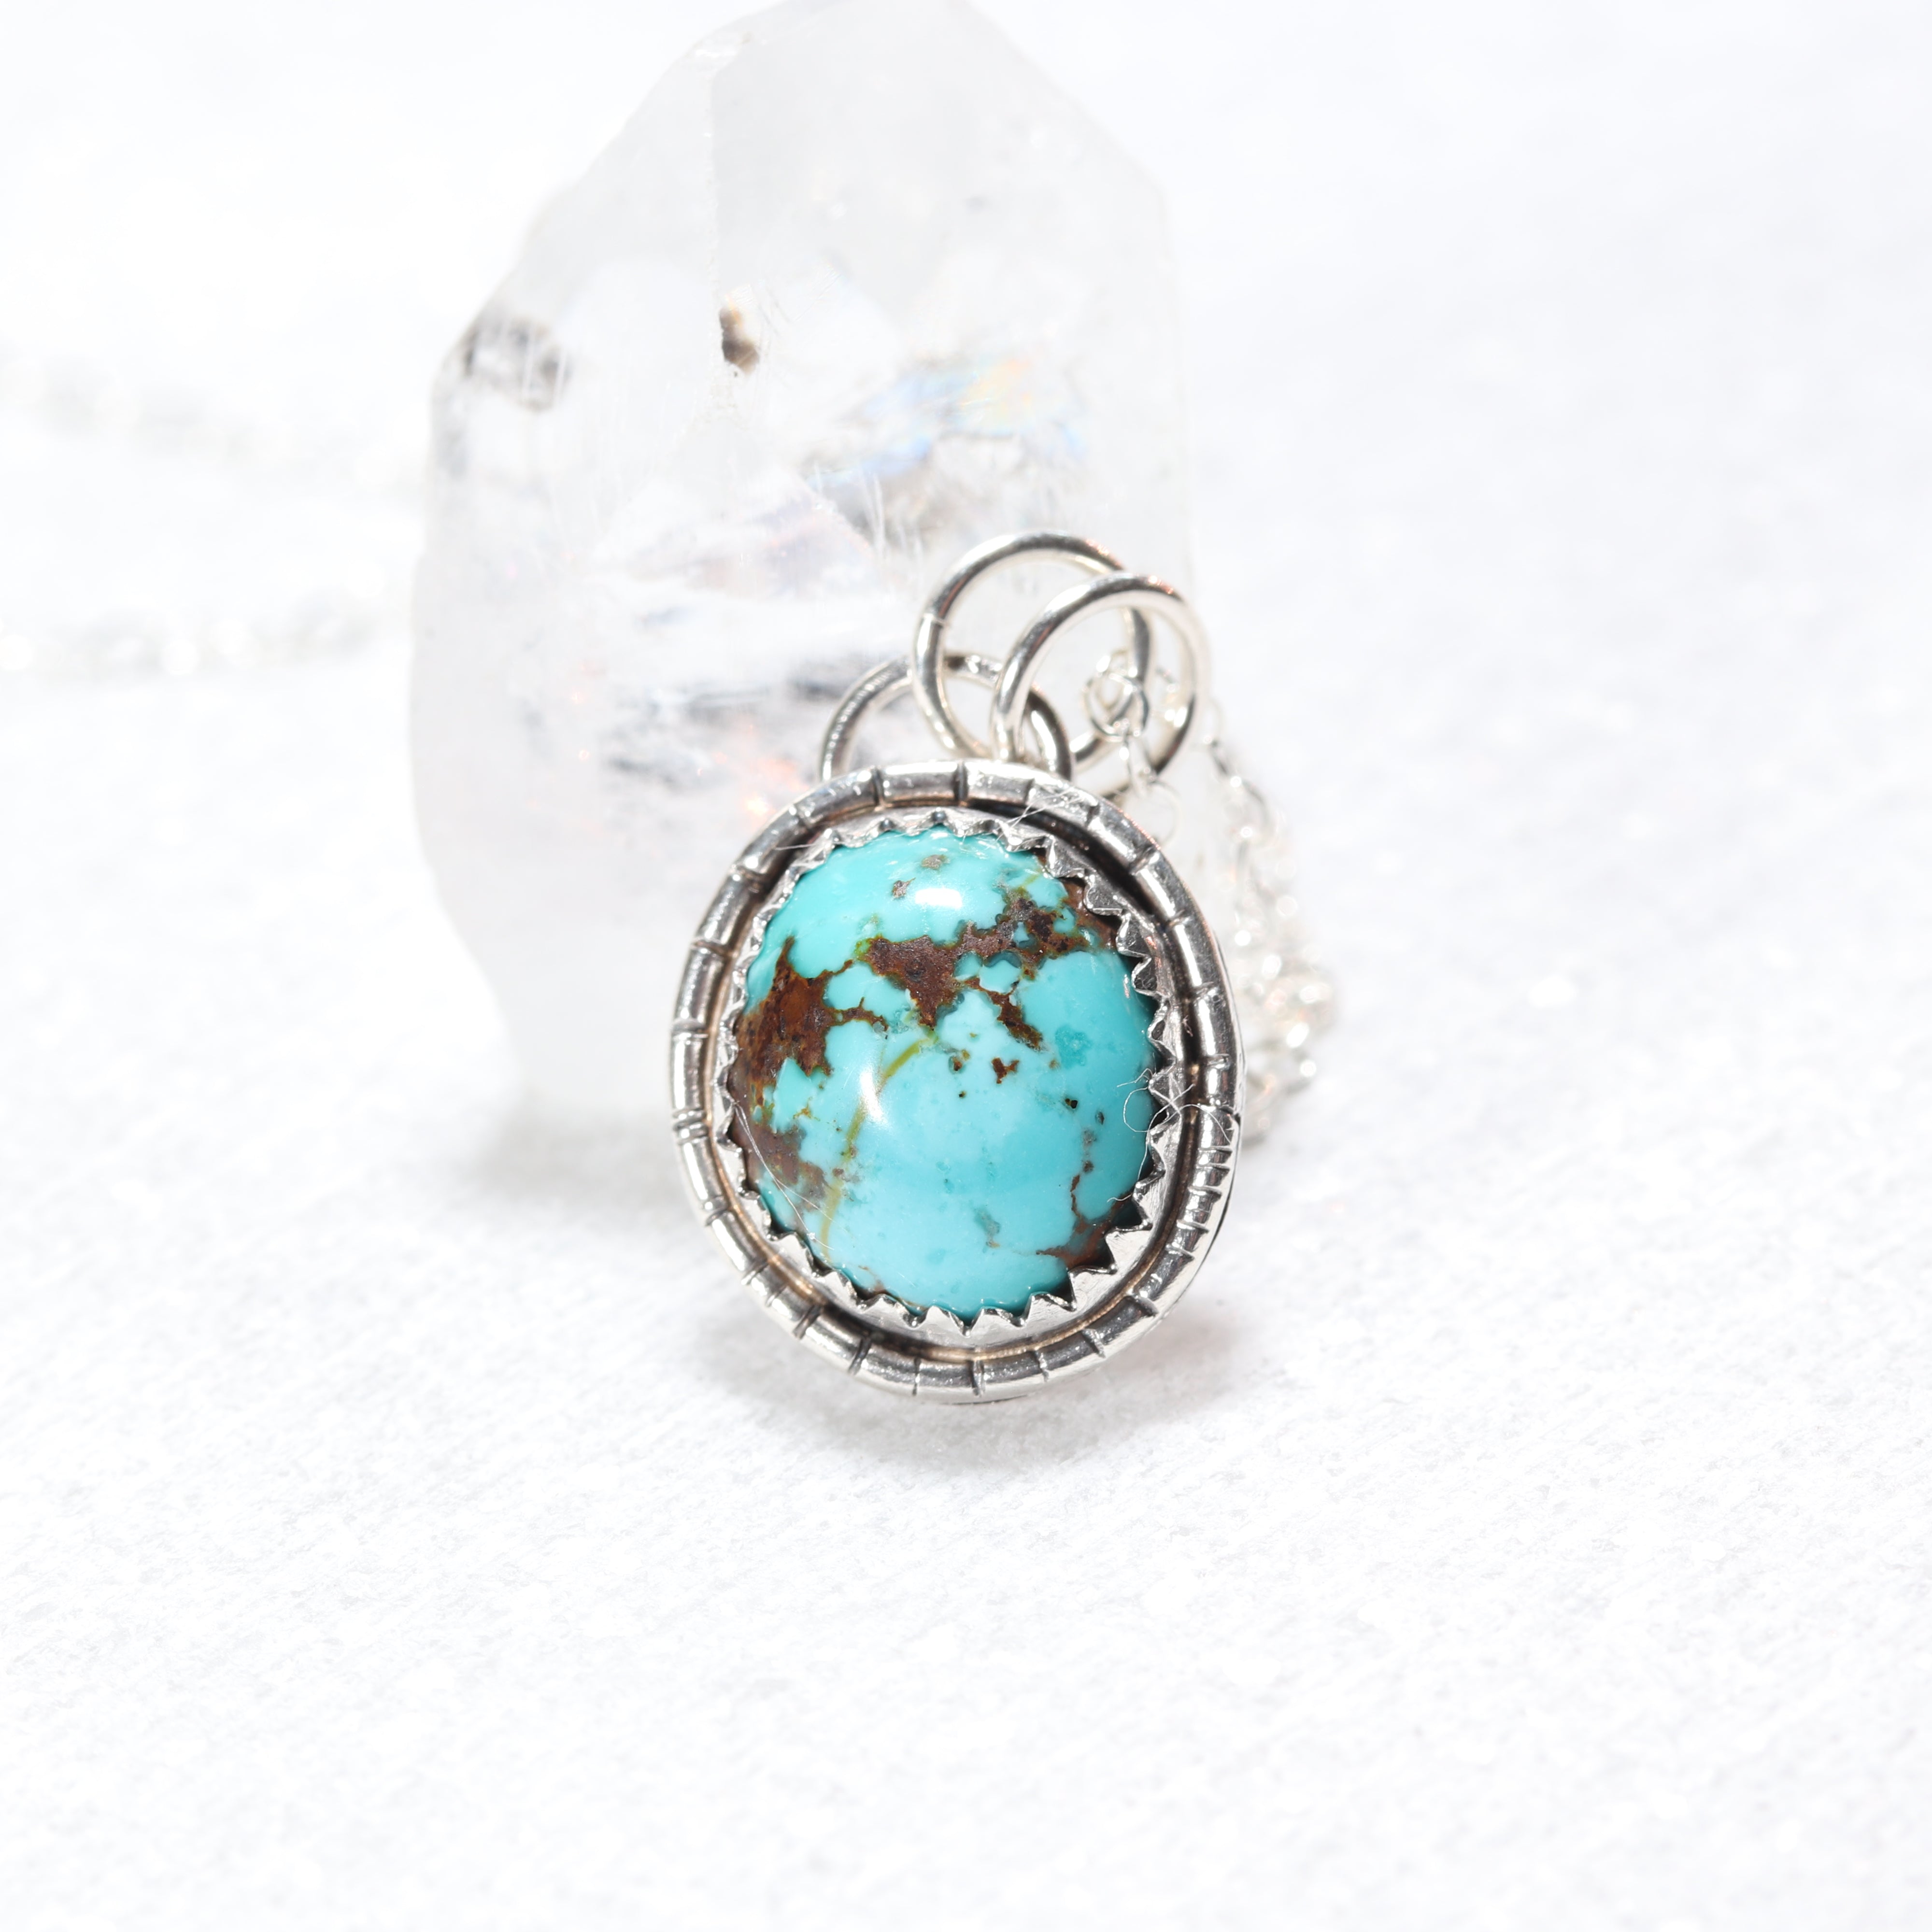 Sierra Nevada Turquoise Necklace in Sterling SilverSierra Nevada Turquoise Necklace in Sterling Silver